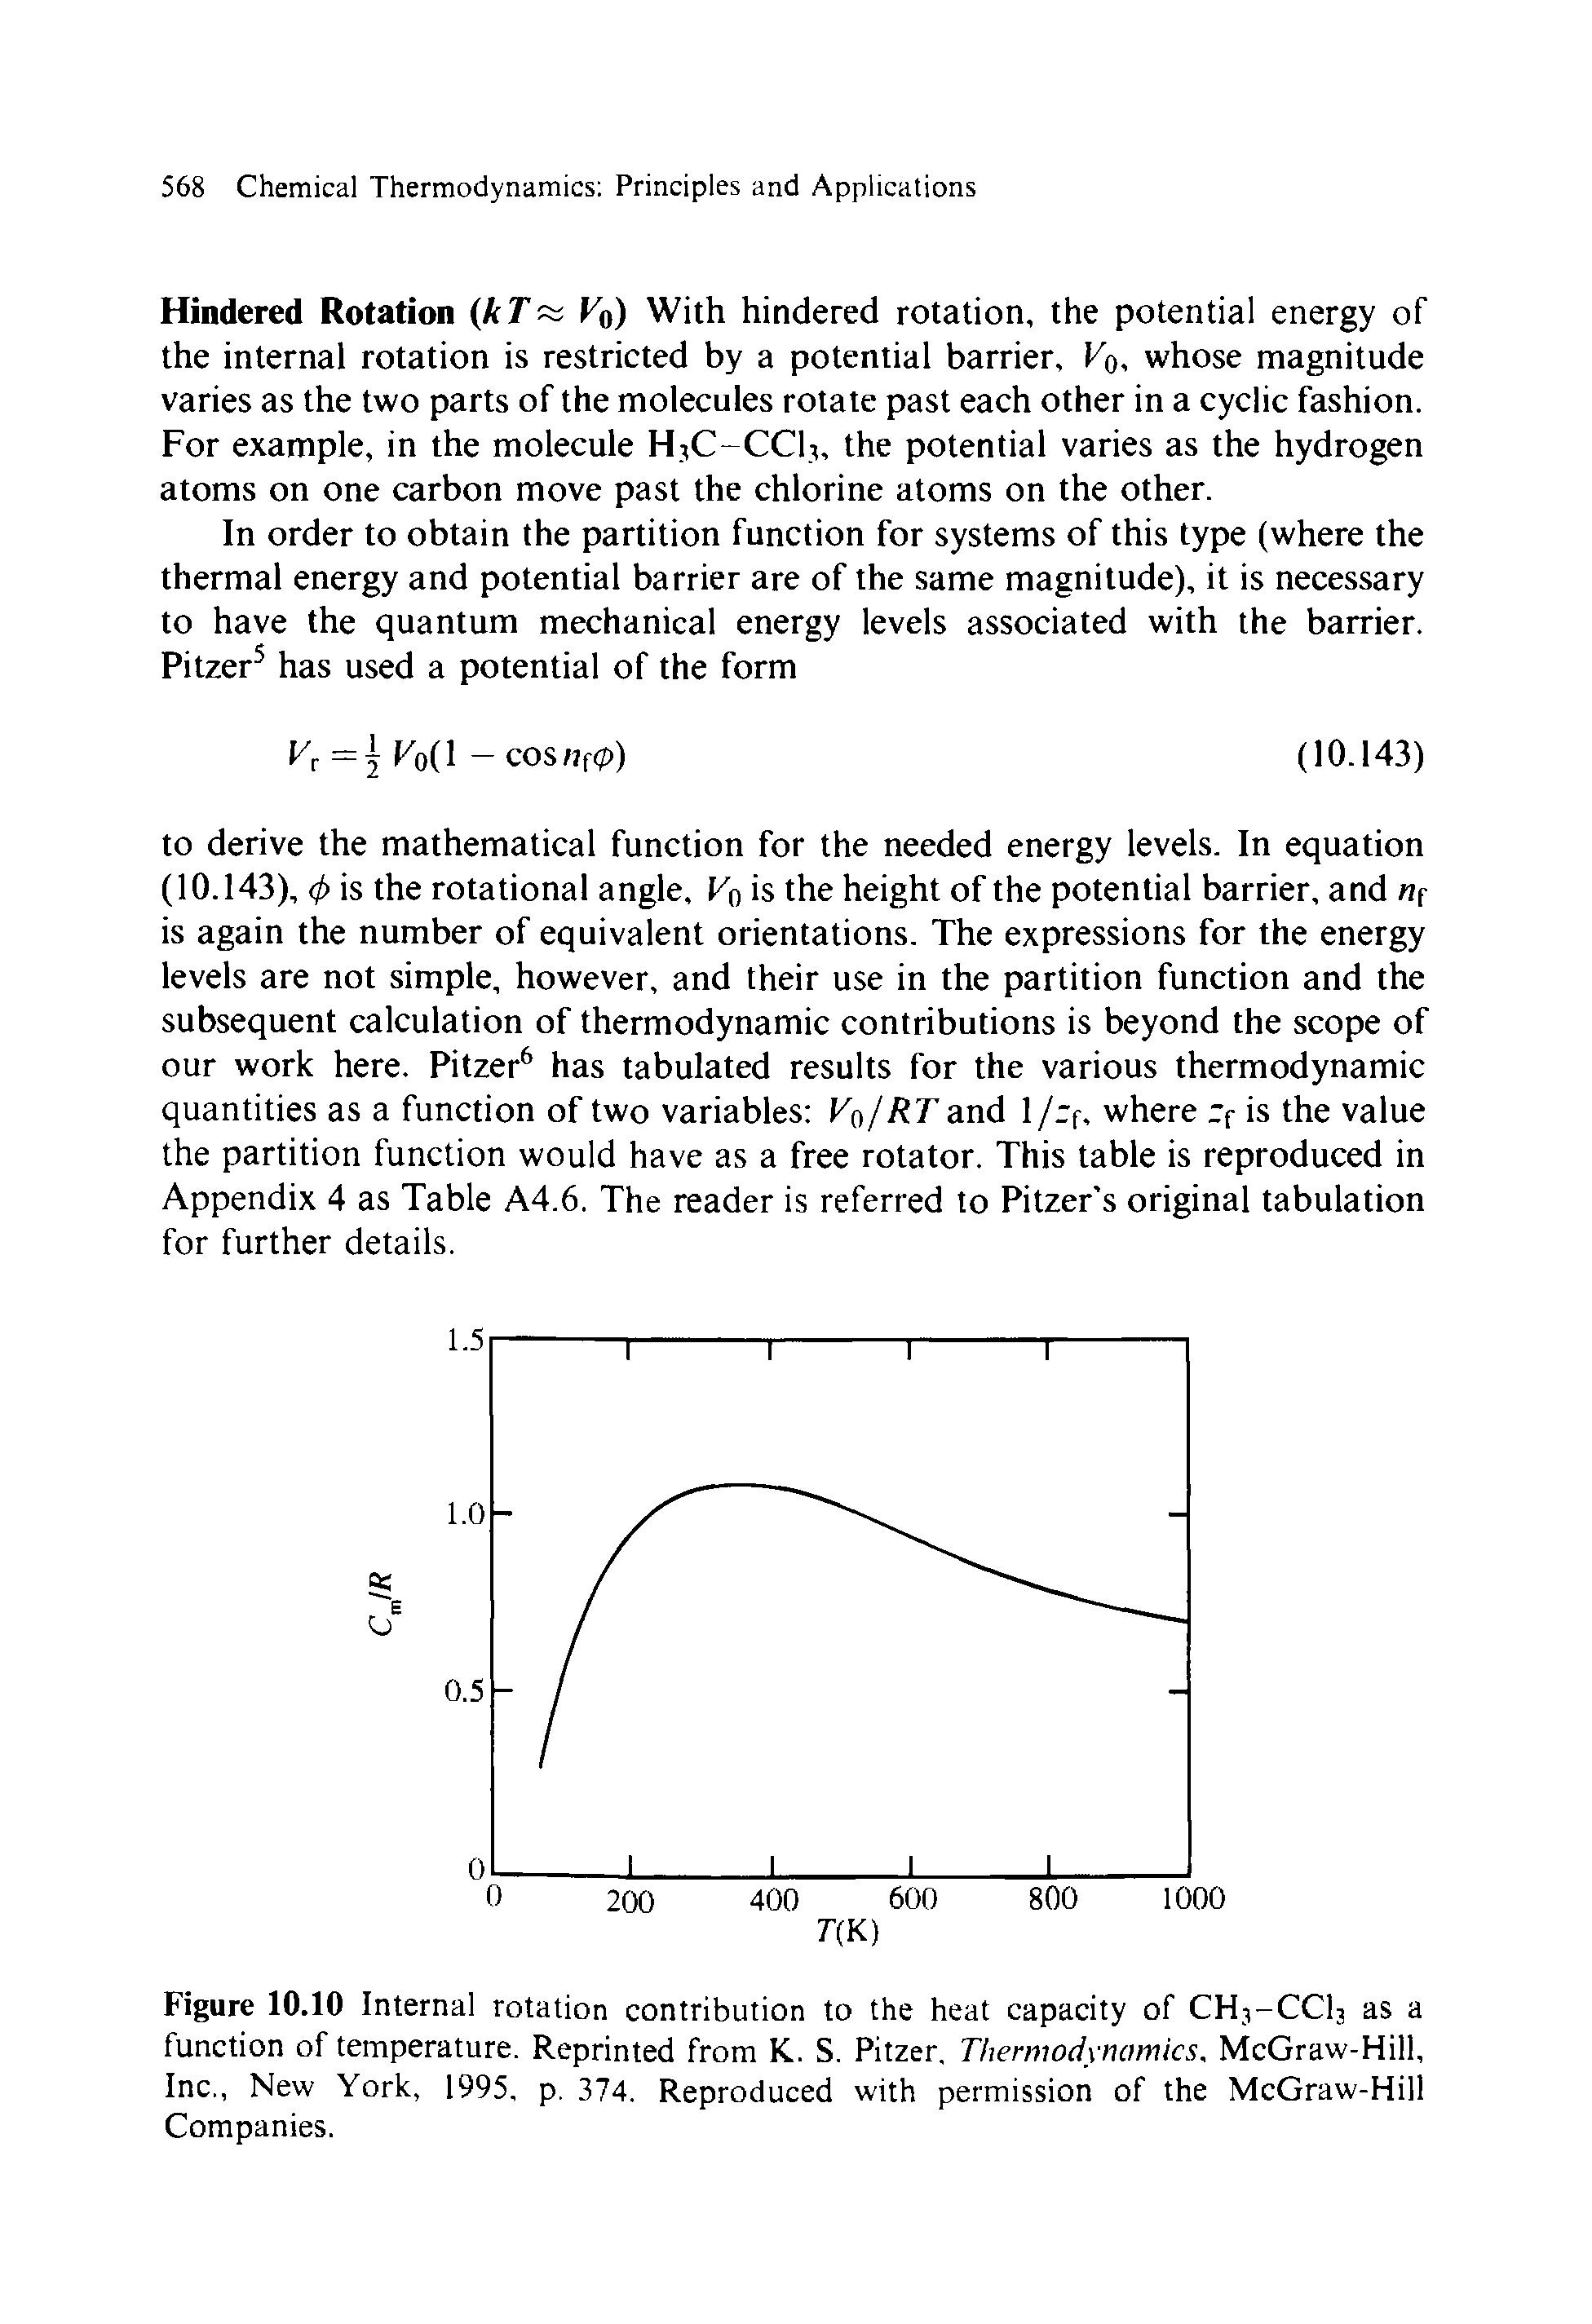 Figure 10.10 Internal rotation contribution to the heat capacity of CH3-CCI3 as a function of temperature. Reprinted from K. S. Pitzer. Thermodynamics, McGraw-Hill, Inc., New York, 1995, p. 374. Reproduced with permission of the McGraw-Hill Companies.